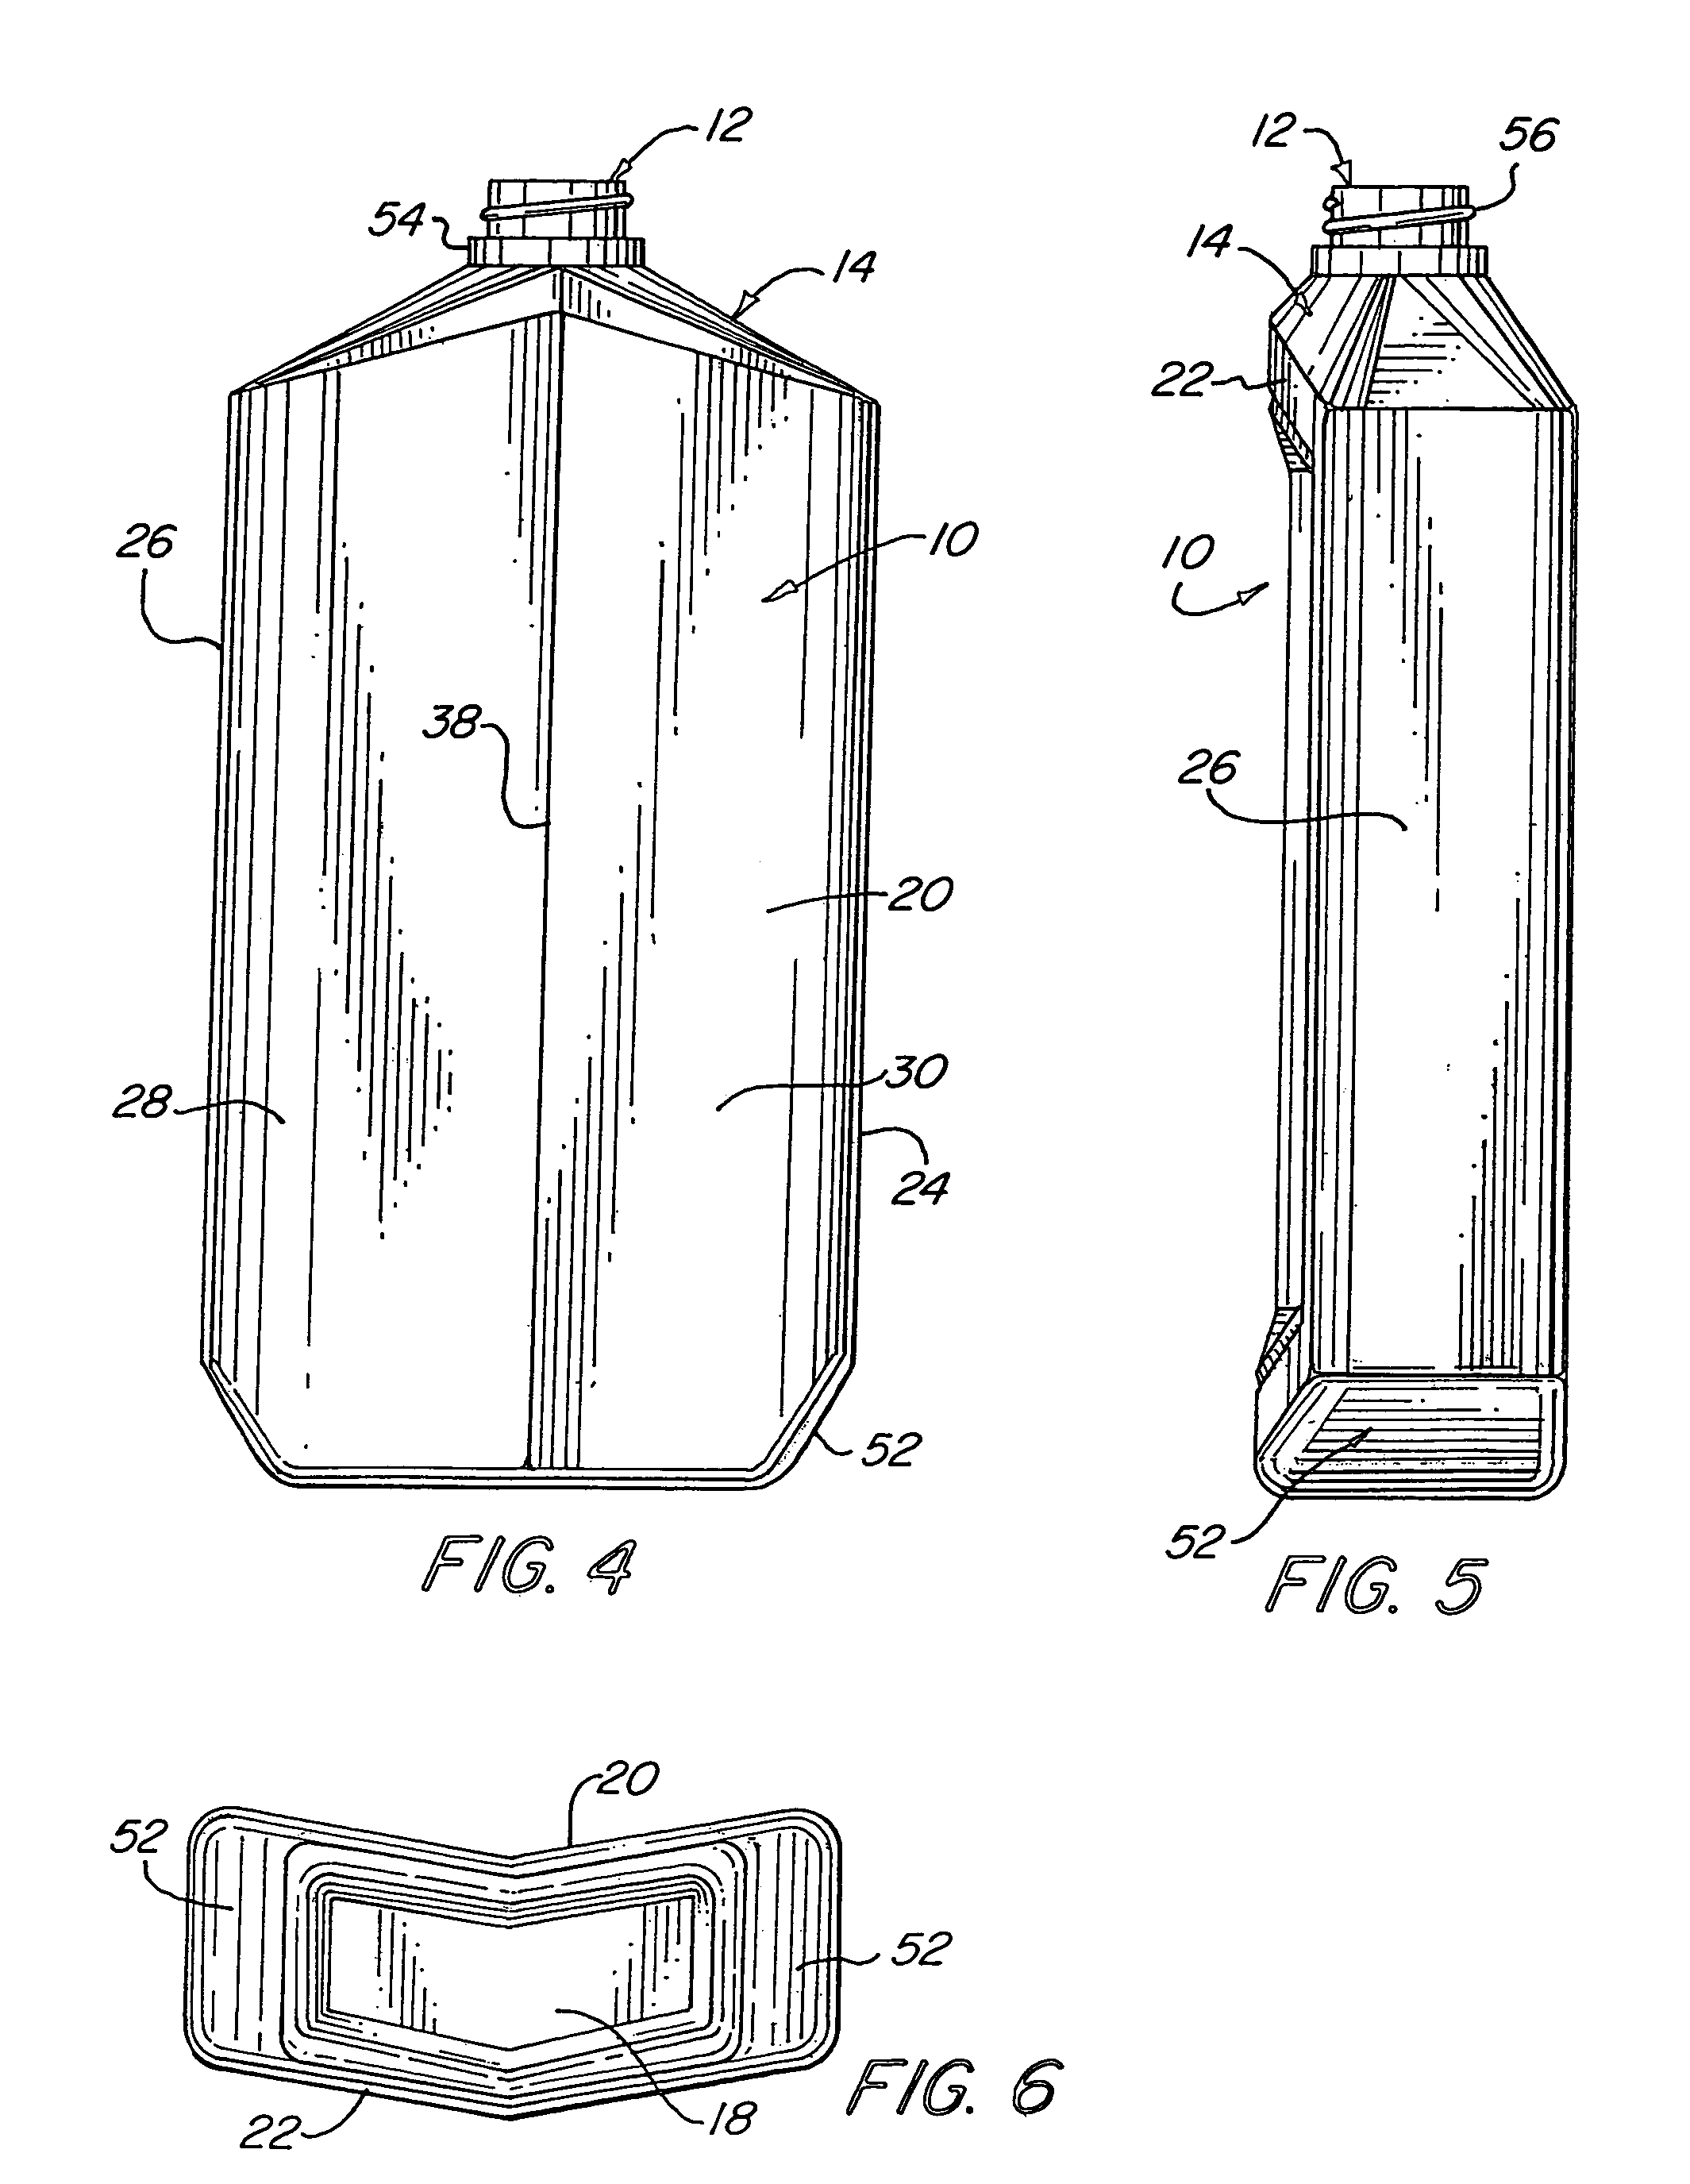 Bottle with faceted surfaces and recessed panel